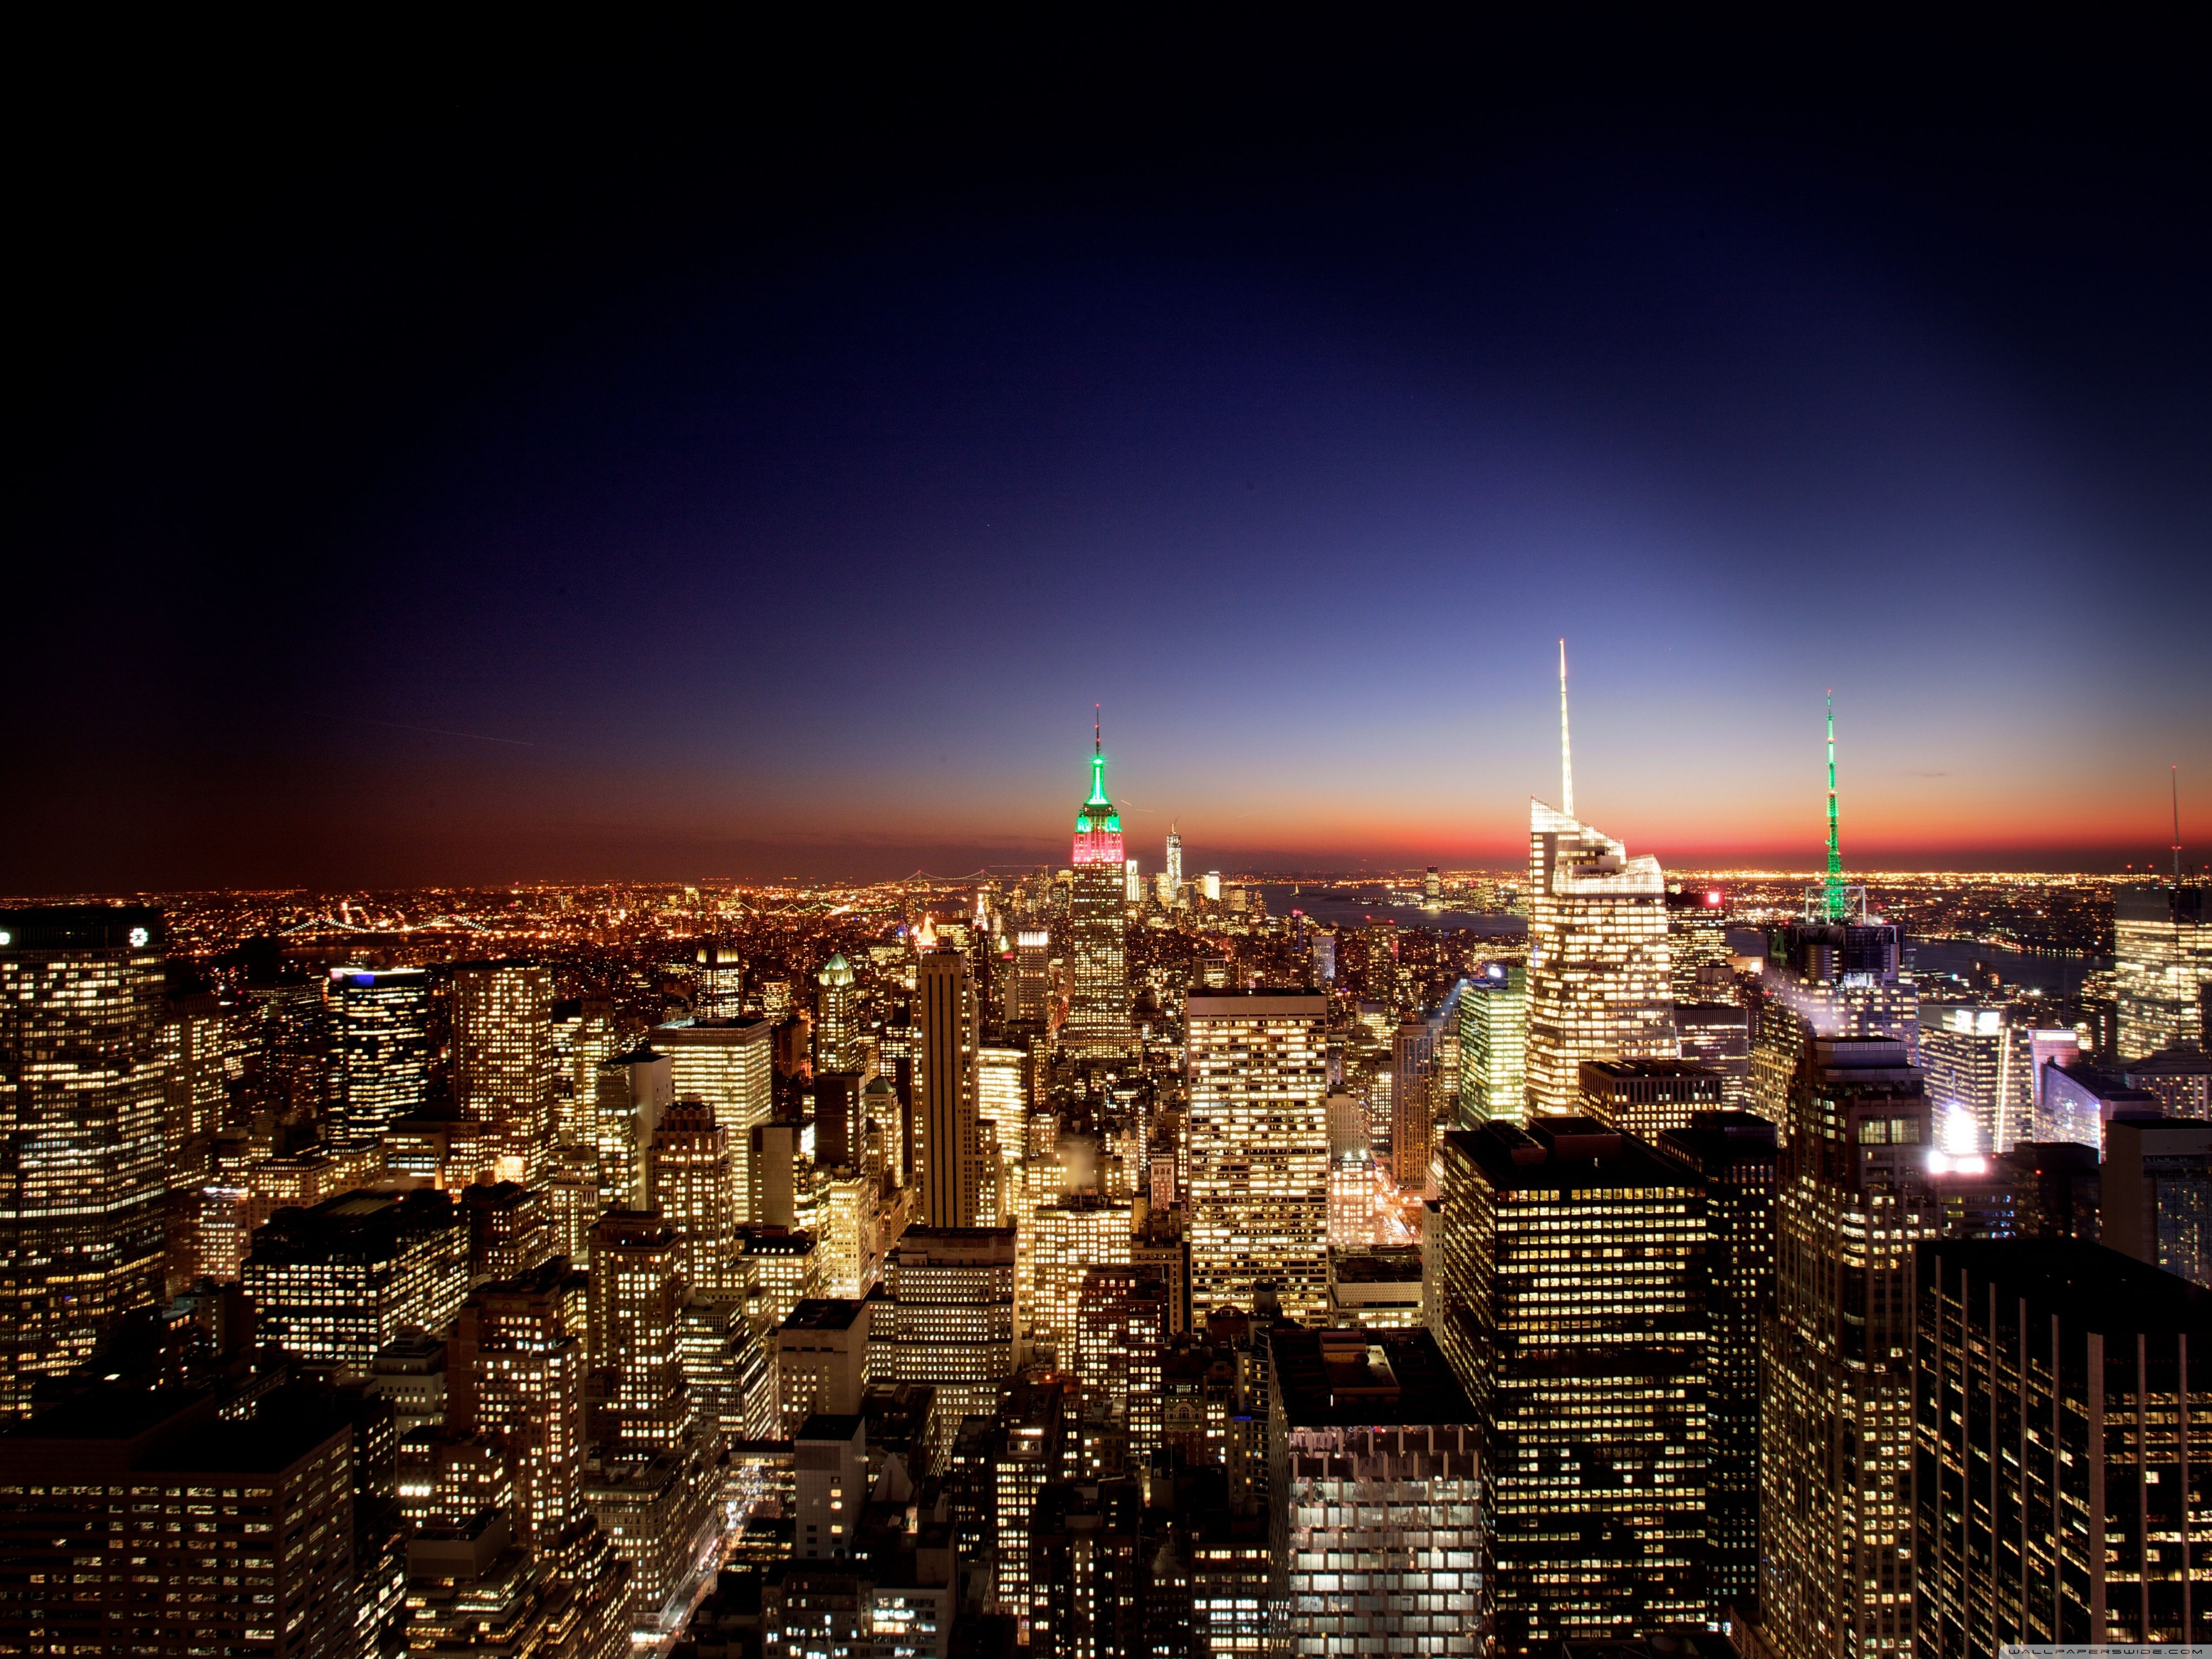 New York City At Night Ultra HD Desktop Background Wallpaper for: Multi Display, Dual Monitor, Tablet